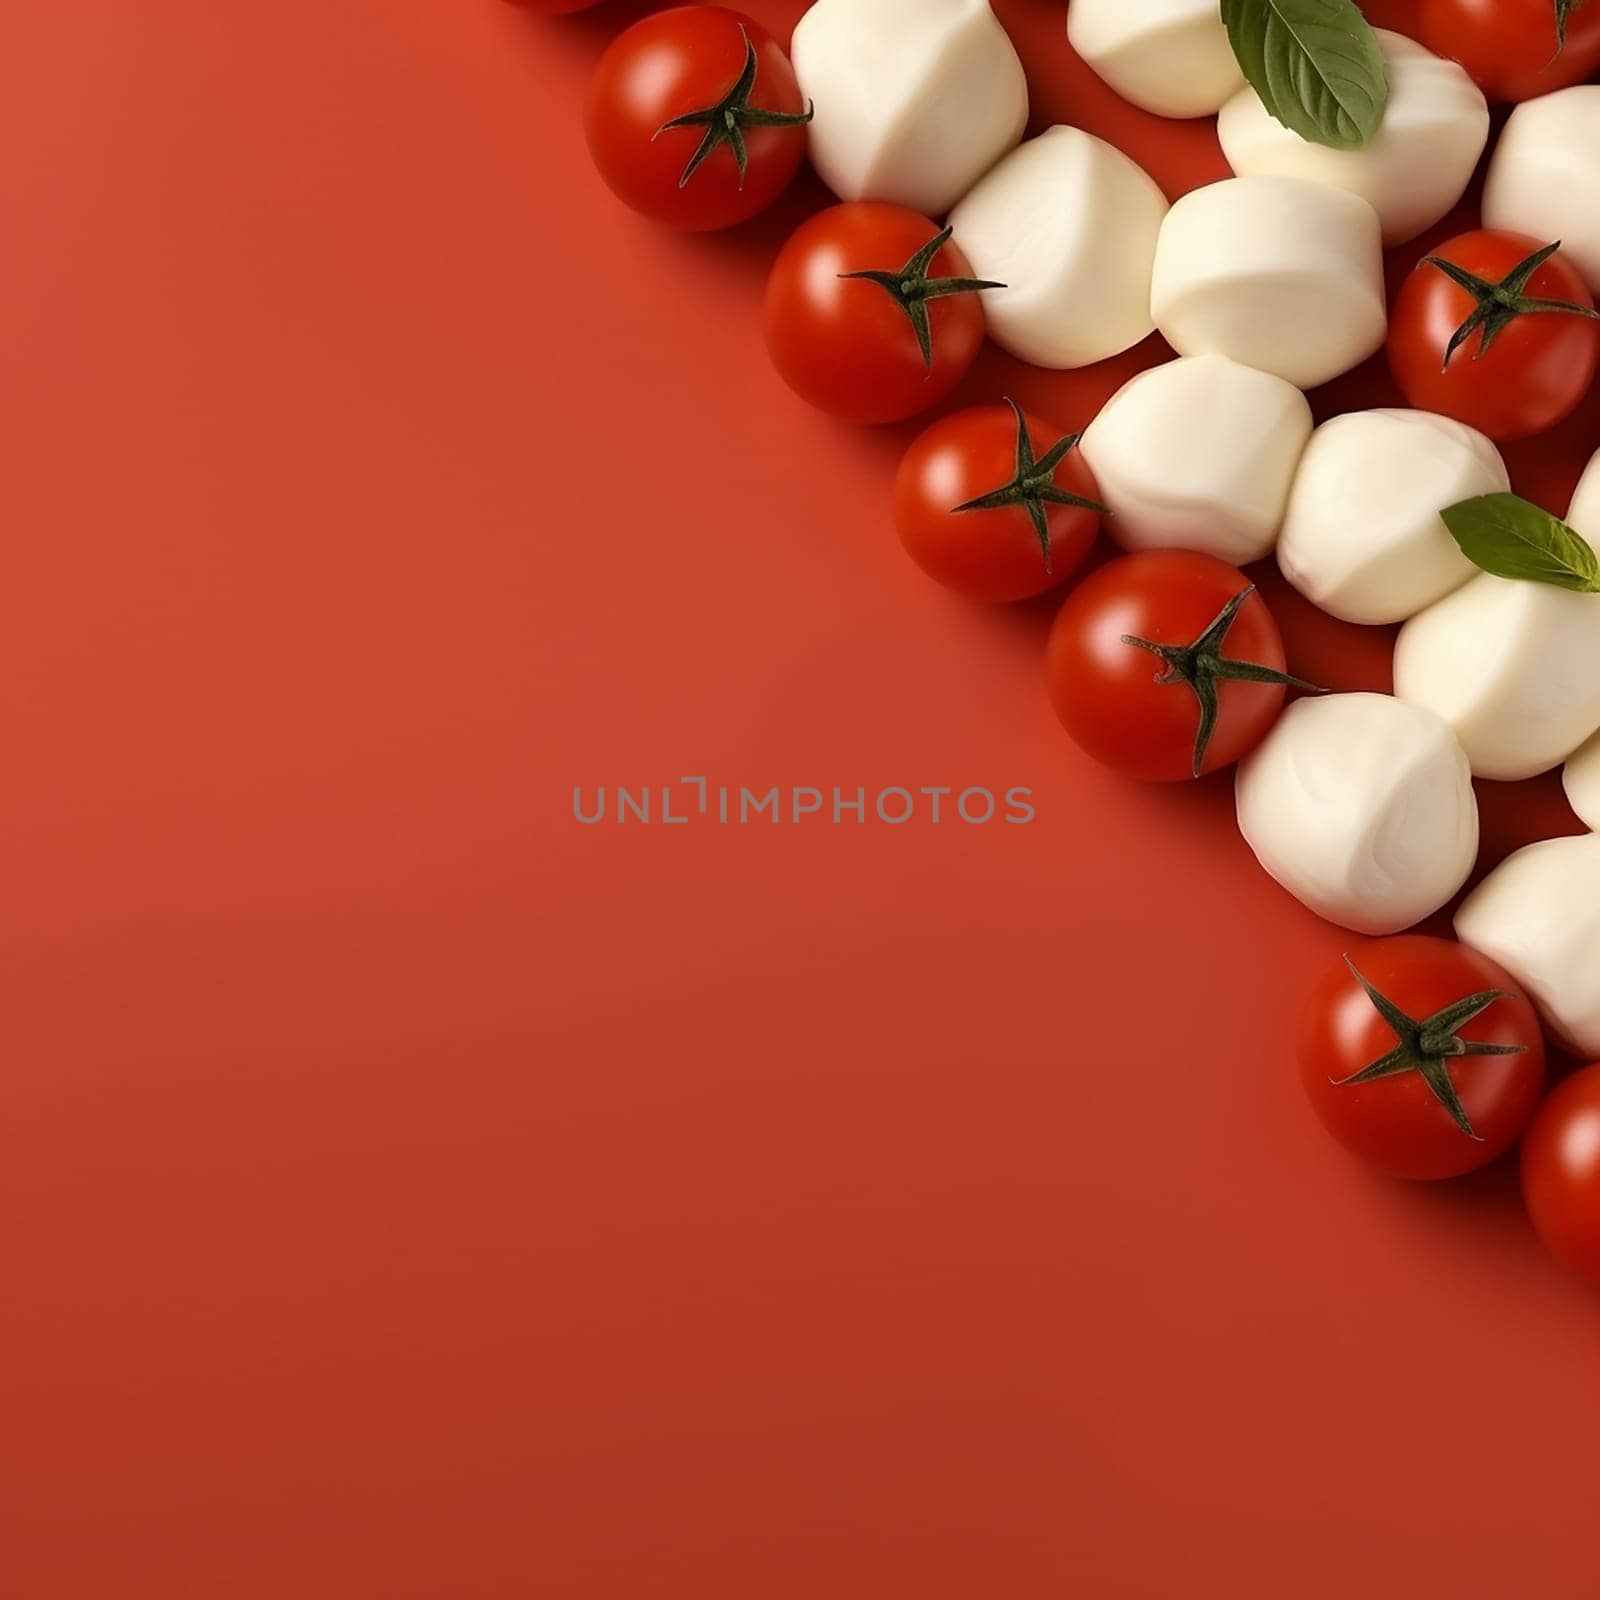 Symmetric pattern of cherry tomatoes and mozzarella with basil on red background